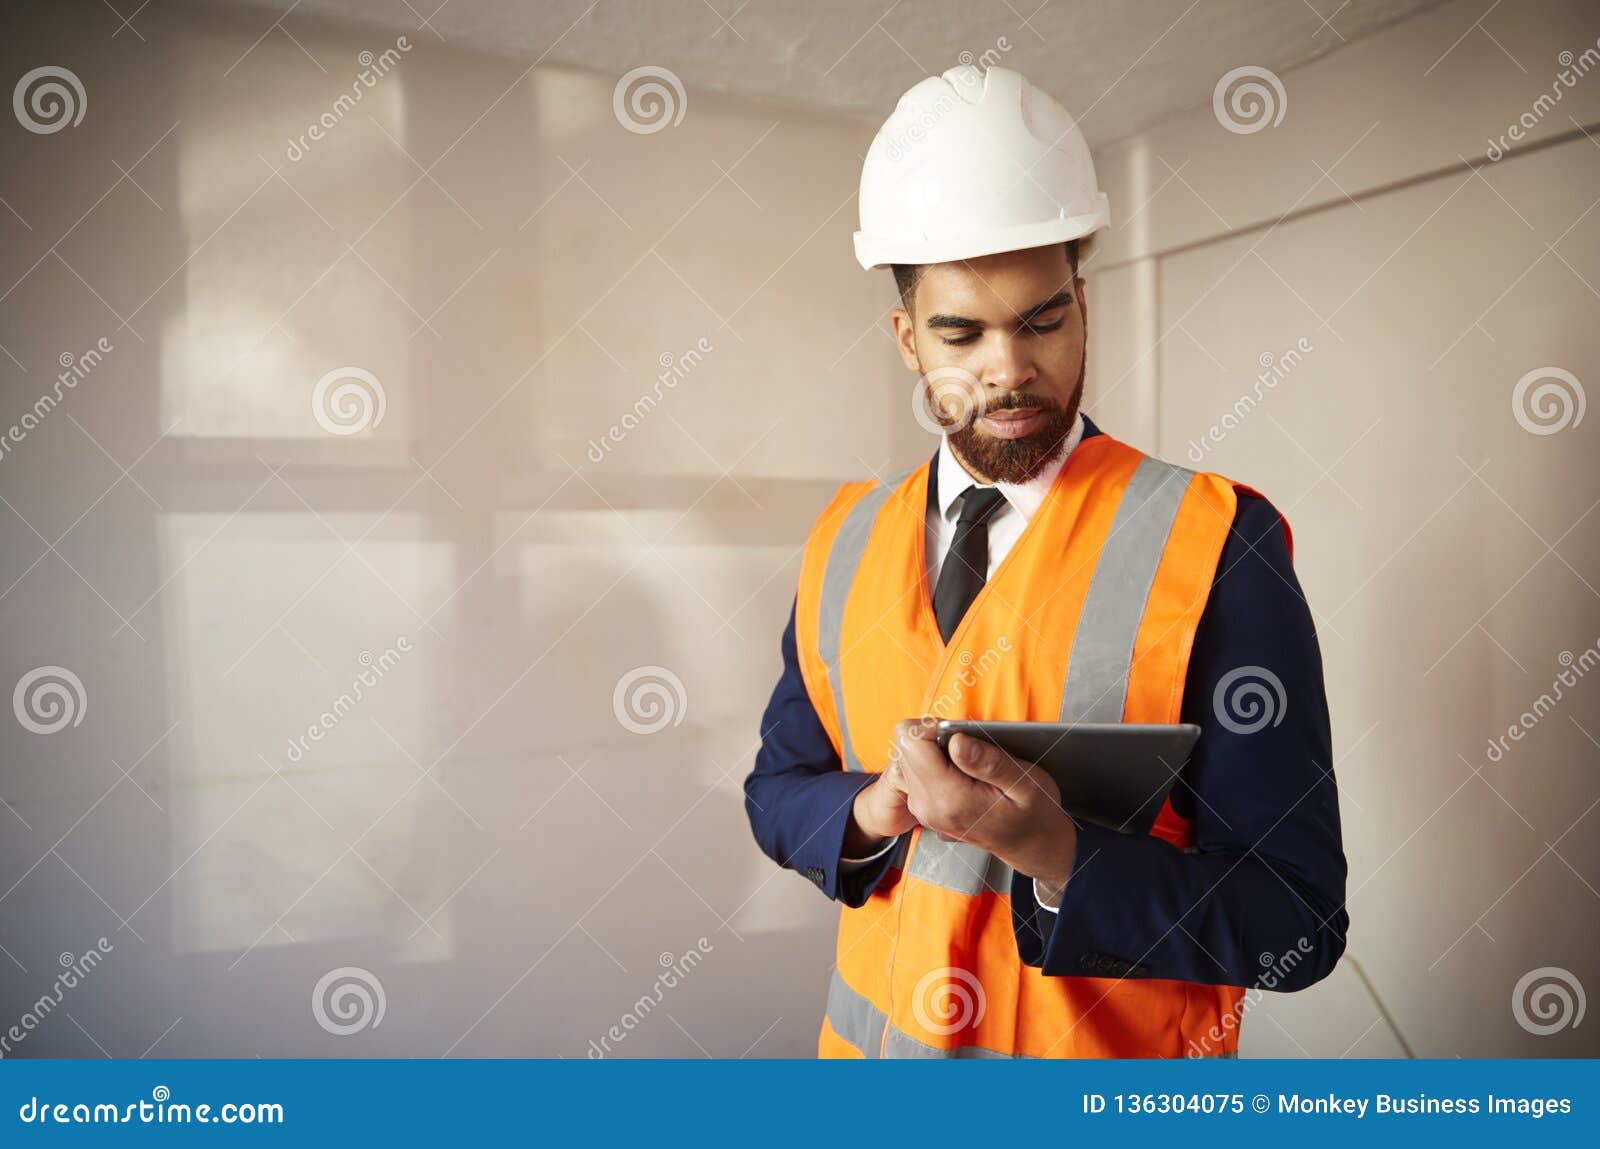 surveyor in hard hat and high visibility jacket with digital tablet carrying out house inspection